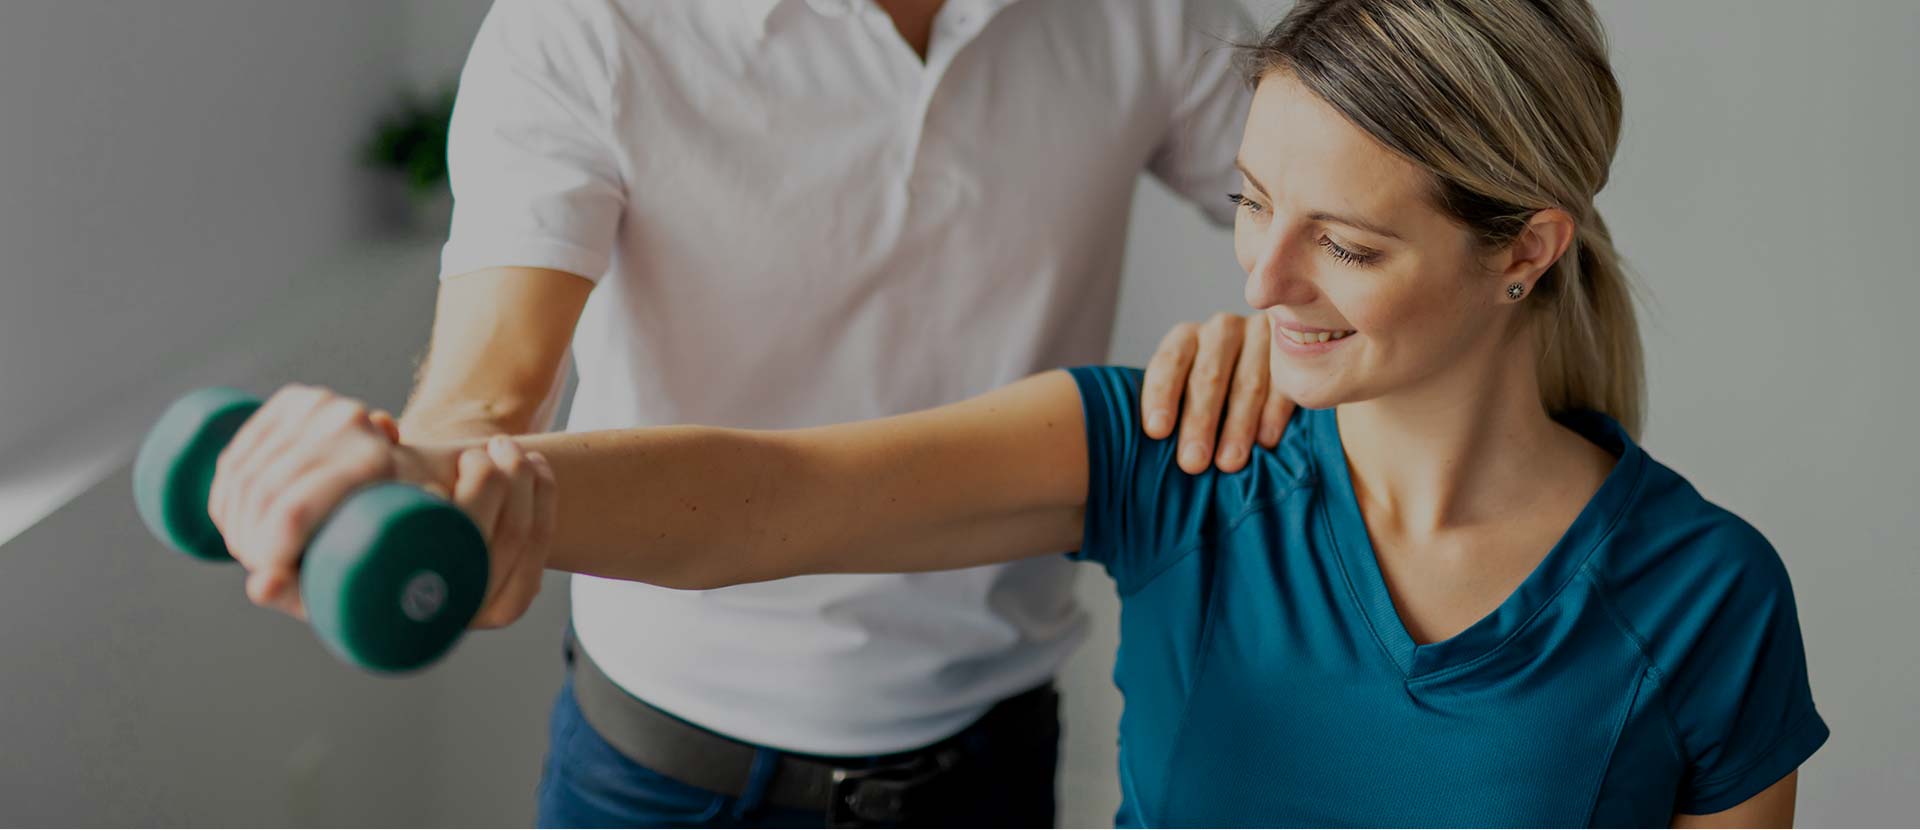 Physical therapy for shoulder and arm in the Indianapolis area from Milestone Physical Therapy & Training | Indianapolis Physical Therapists